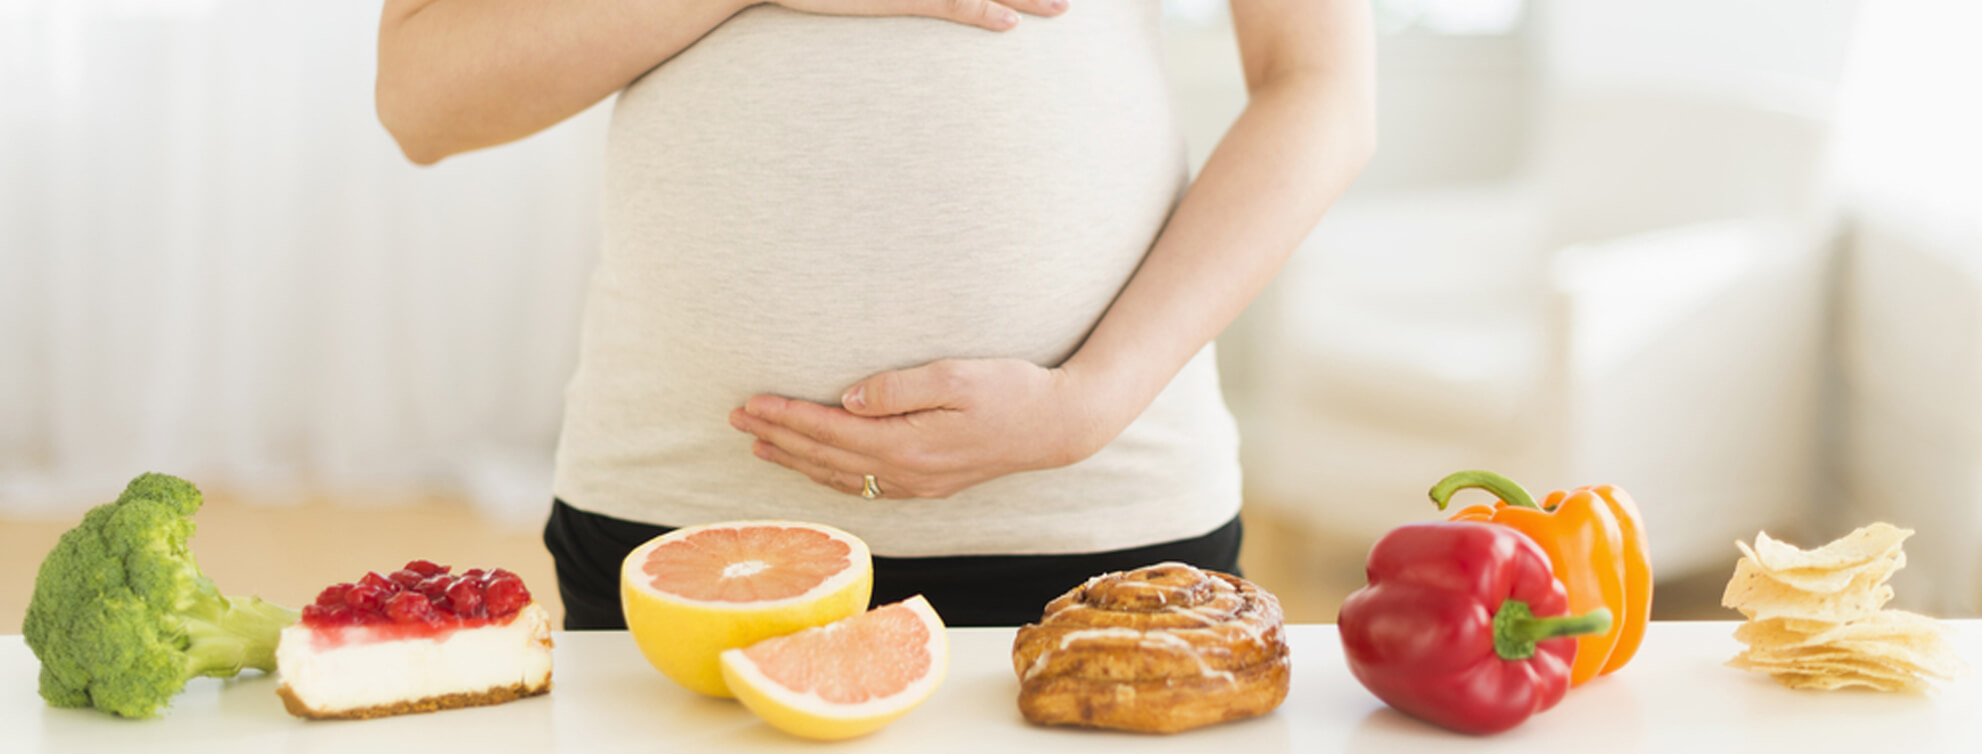 BRAND’S® Article - Eat Your Way to A Healthy Pregnancy